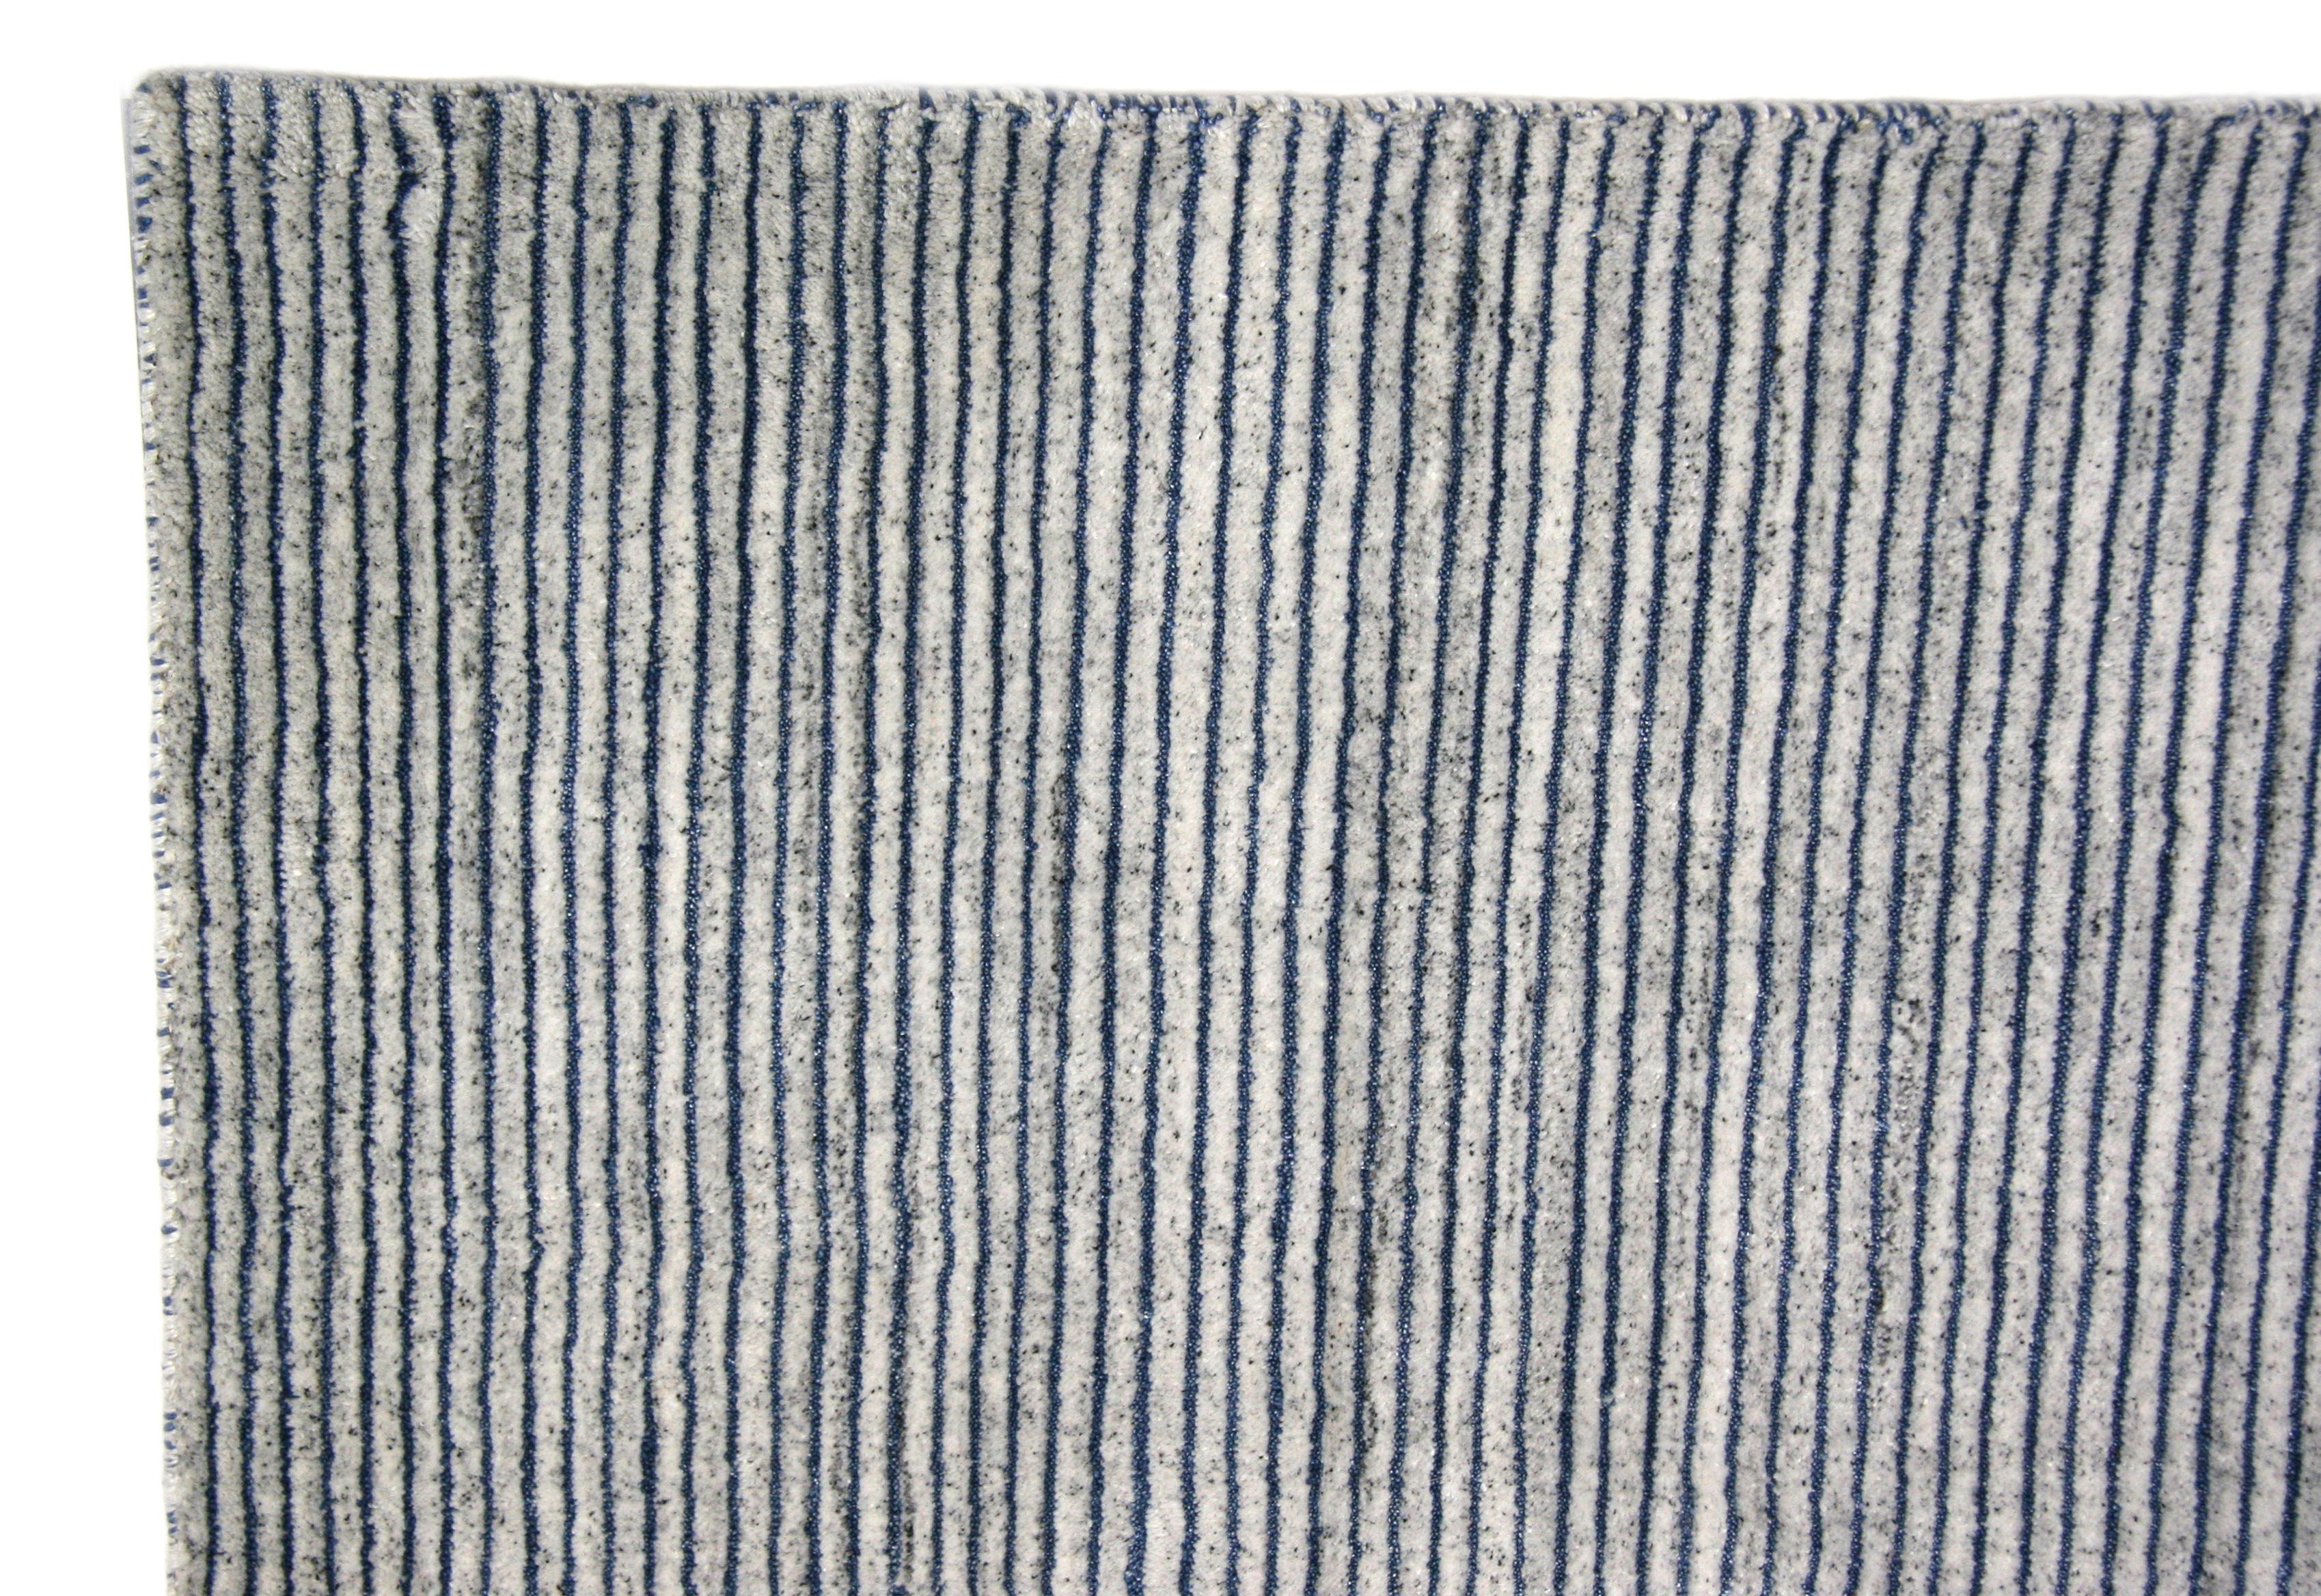 Modern Blue and Gray Stripe Area Rug In New Condition For Sale In Los Angeles, CA